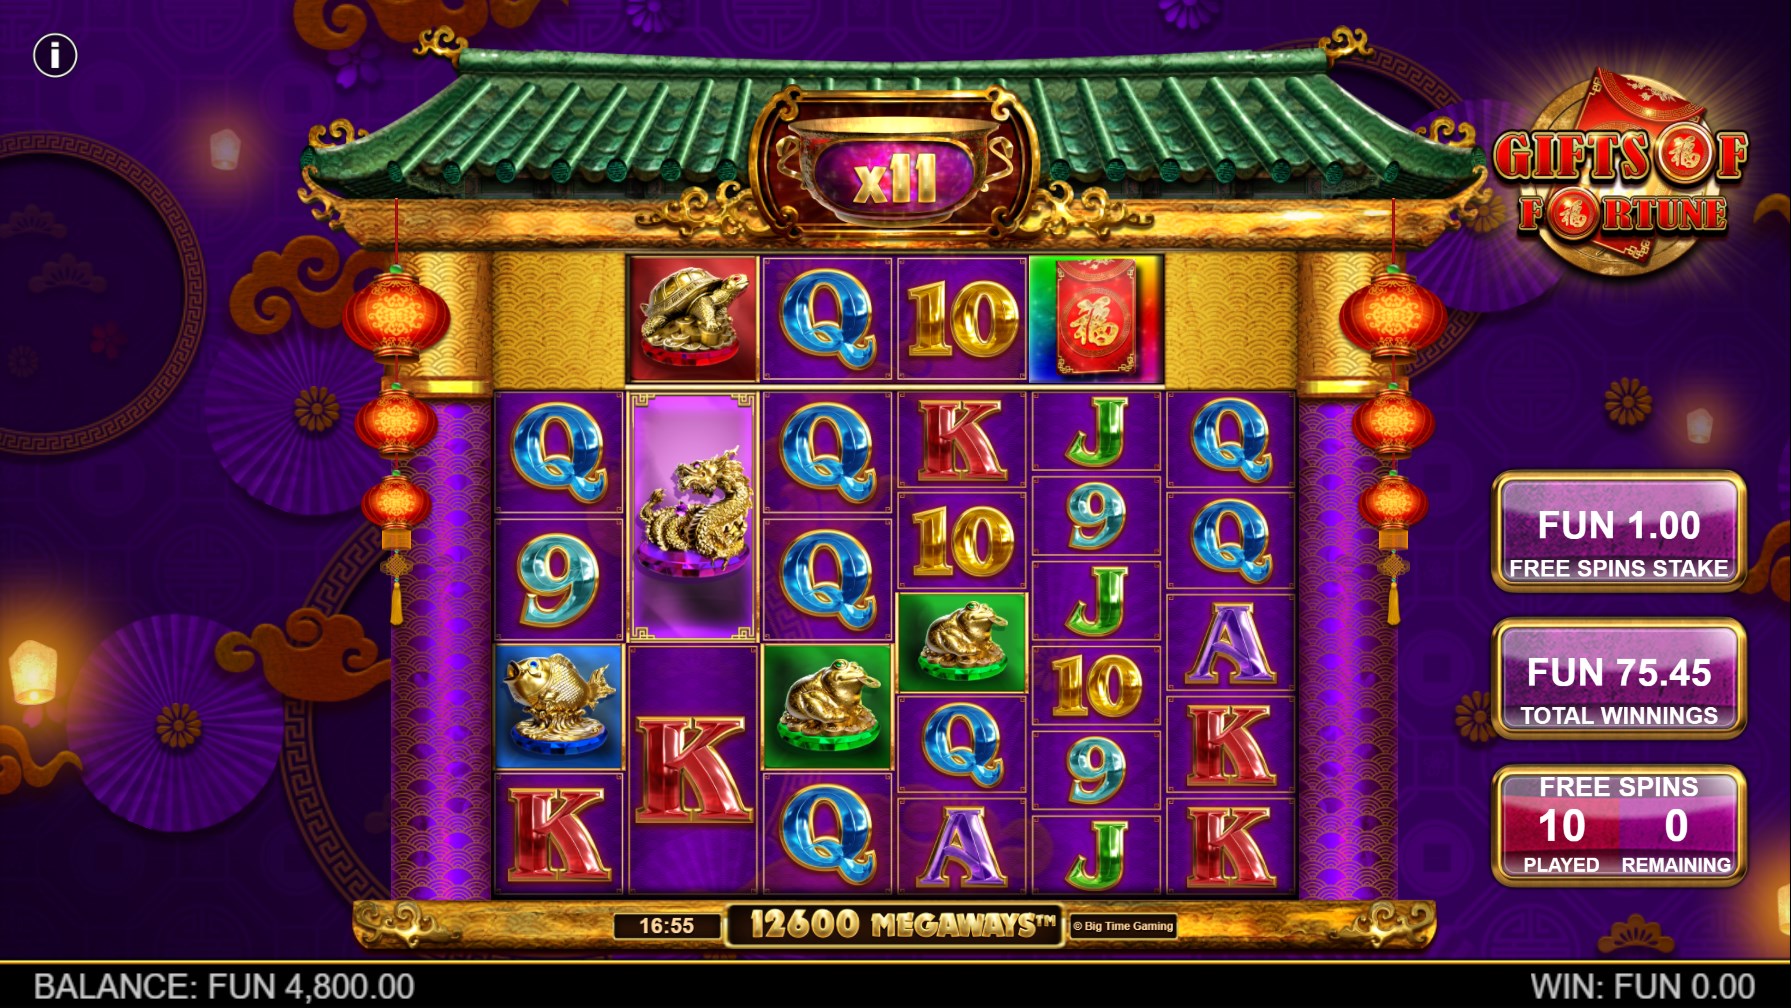 Gifts of Fortune Slot - Enhanced Free Spins